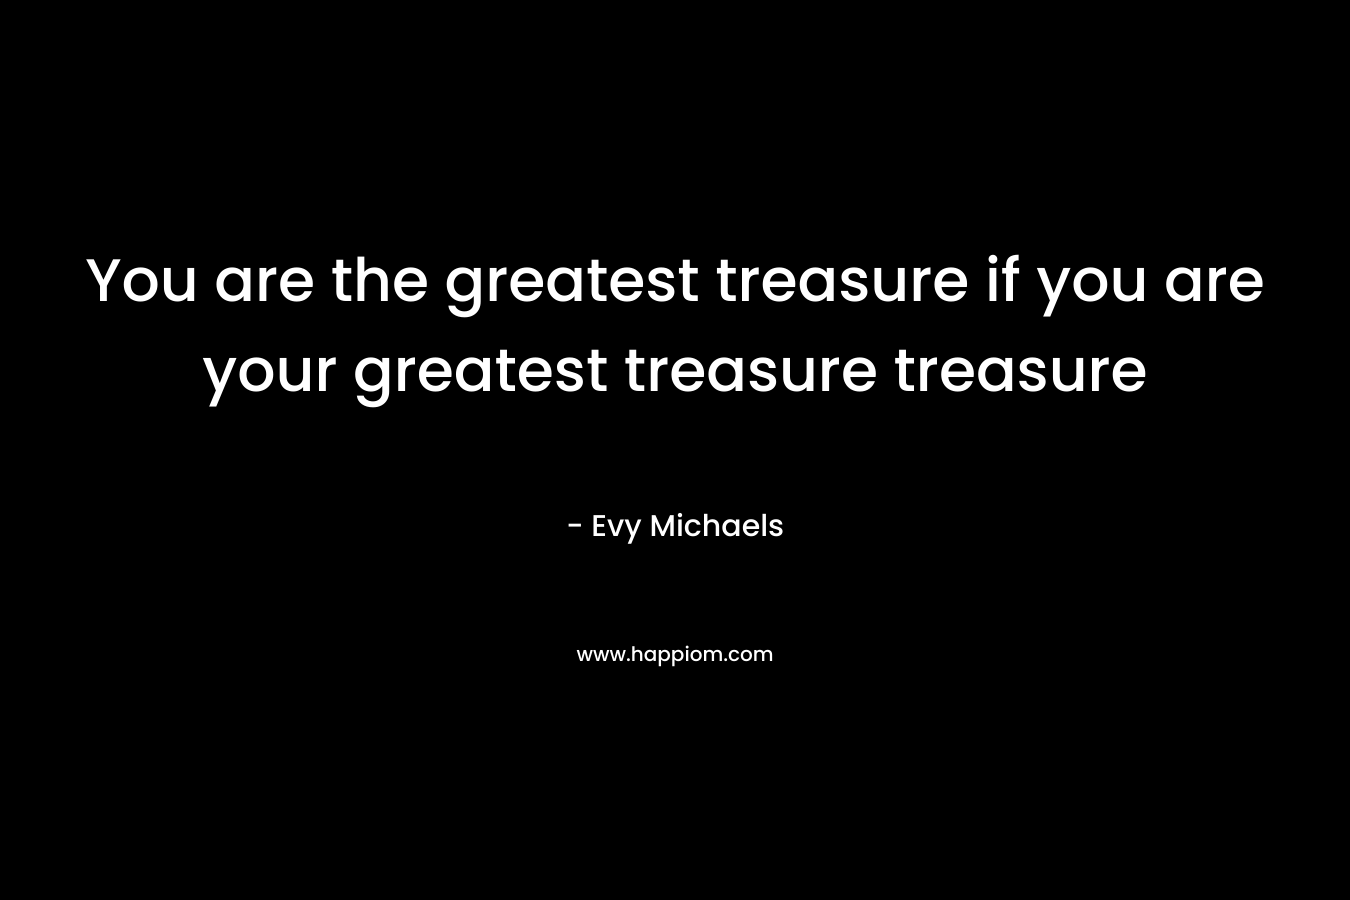 You are the greatest treasure if you are your greatest treasure treasure